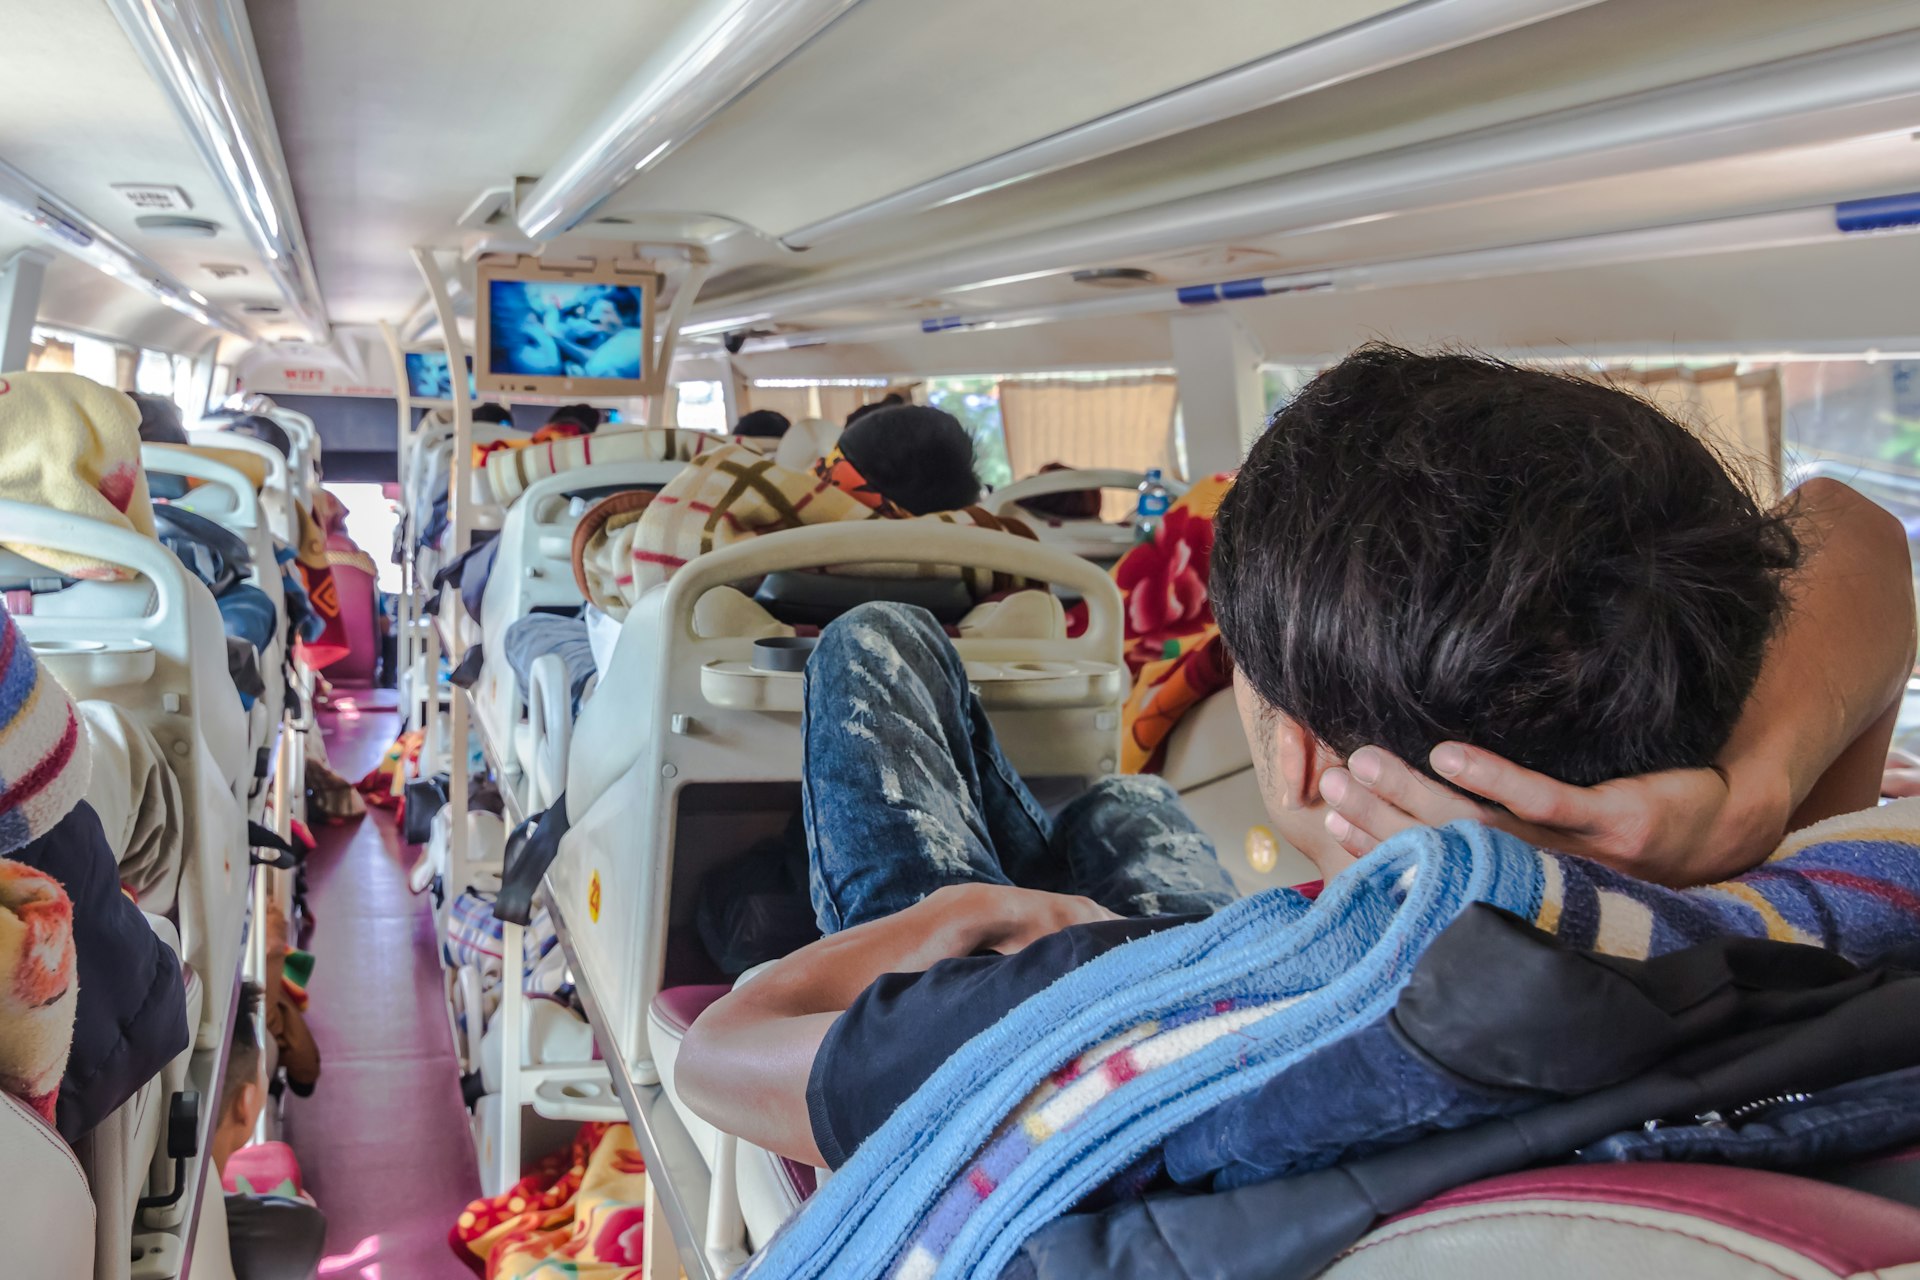 A man watching TV on a long distance sleeper bus in Asia